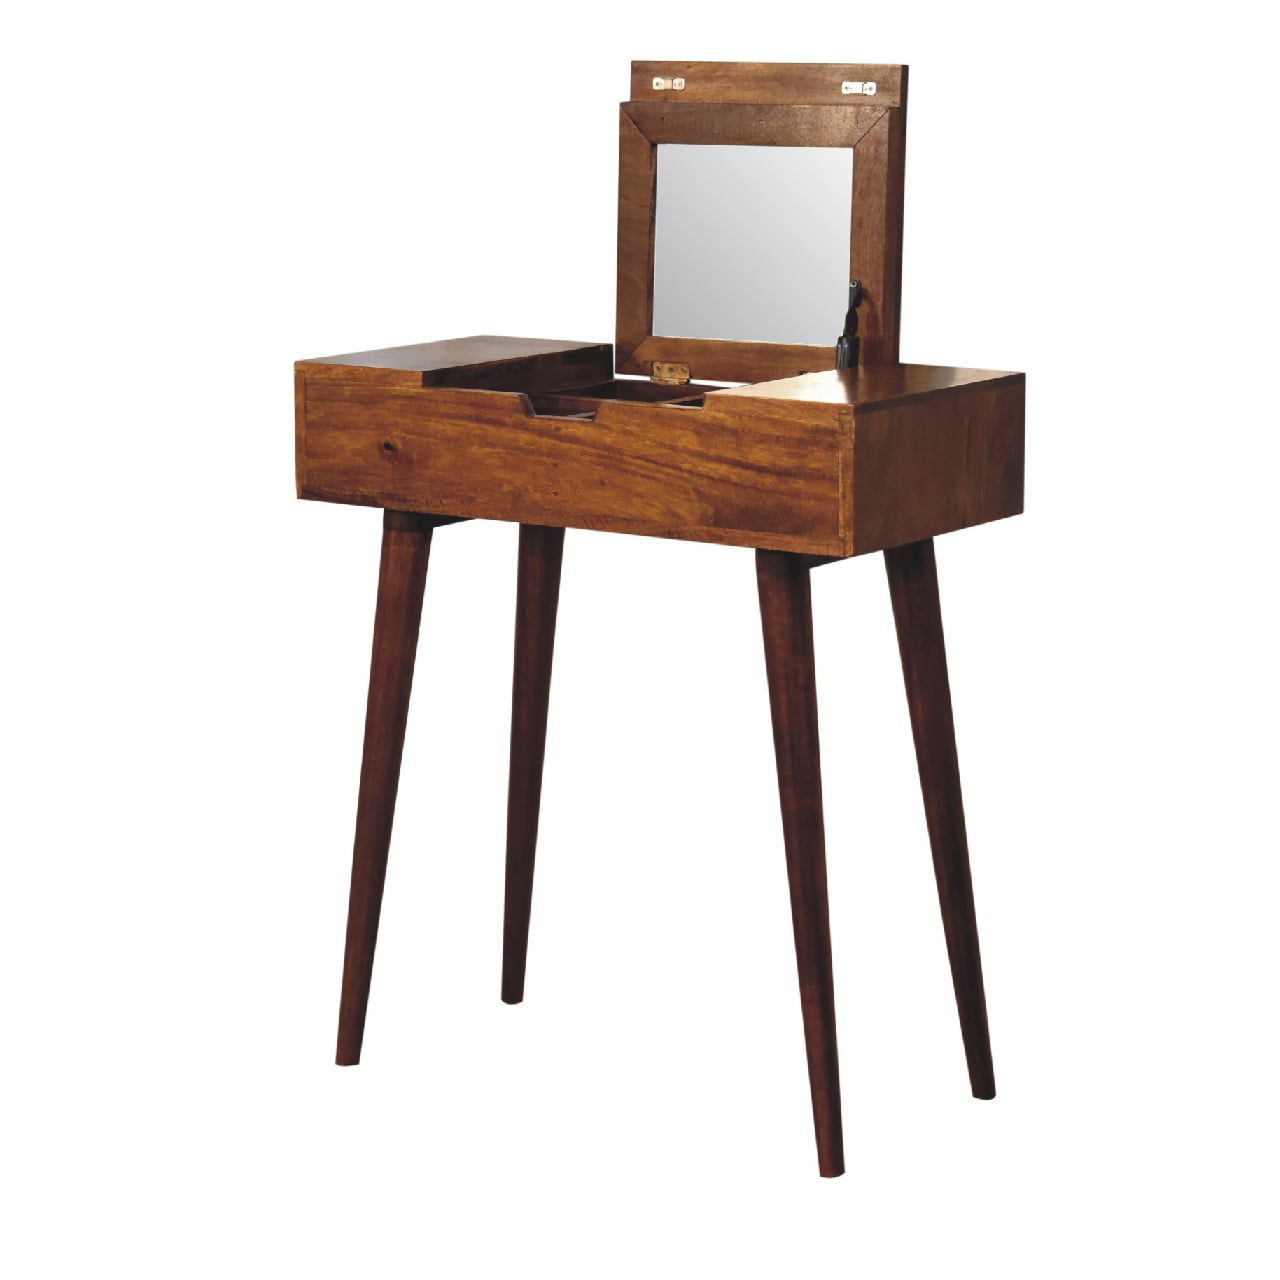 Mini Chestnut Dressing Table with Foldable Mirror